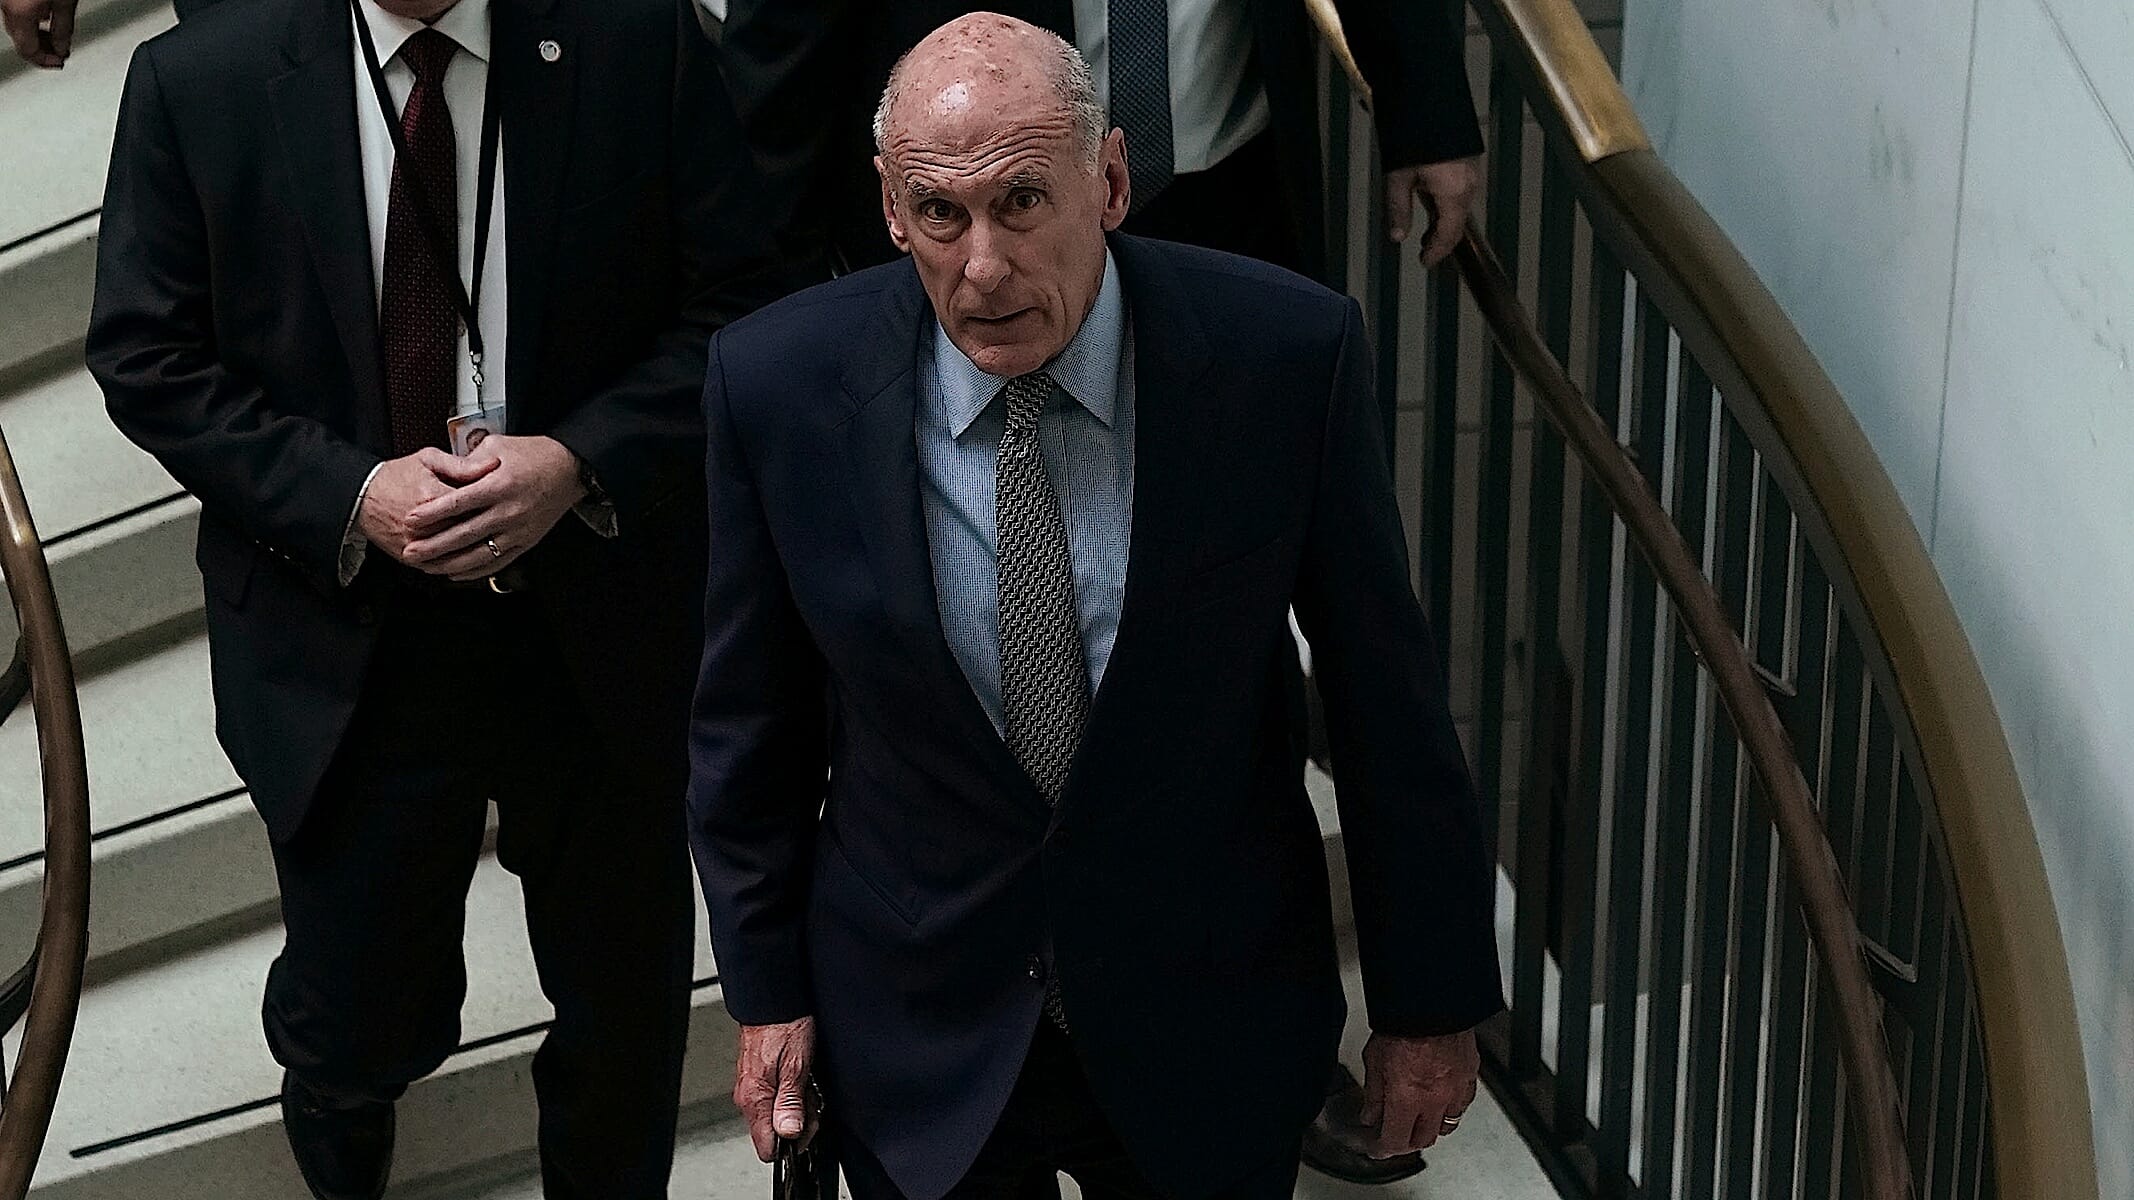 National Intelligence Director Dan Coats Was Another Coward Who Wouldn’t Stand up to Trump